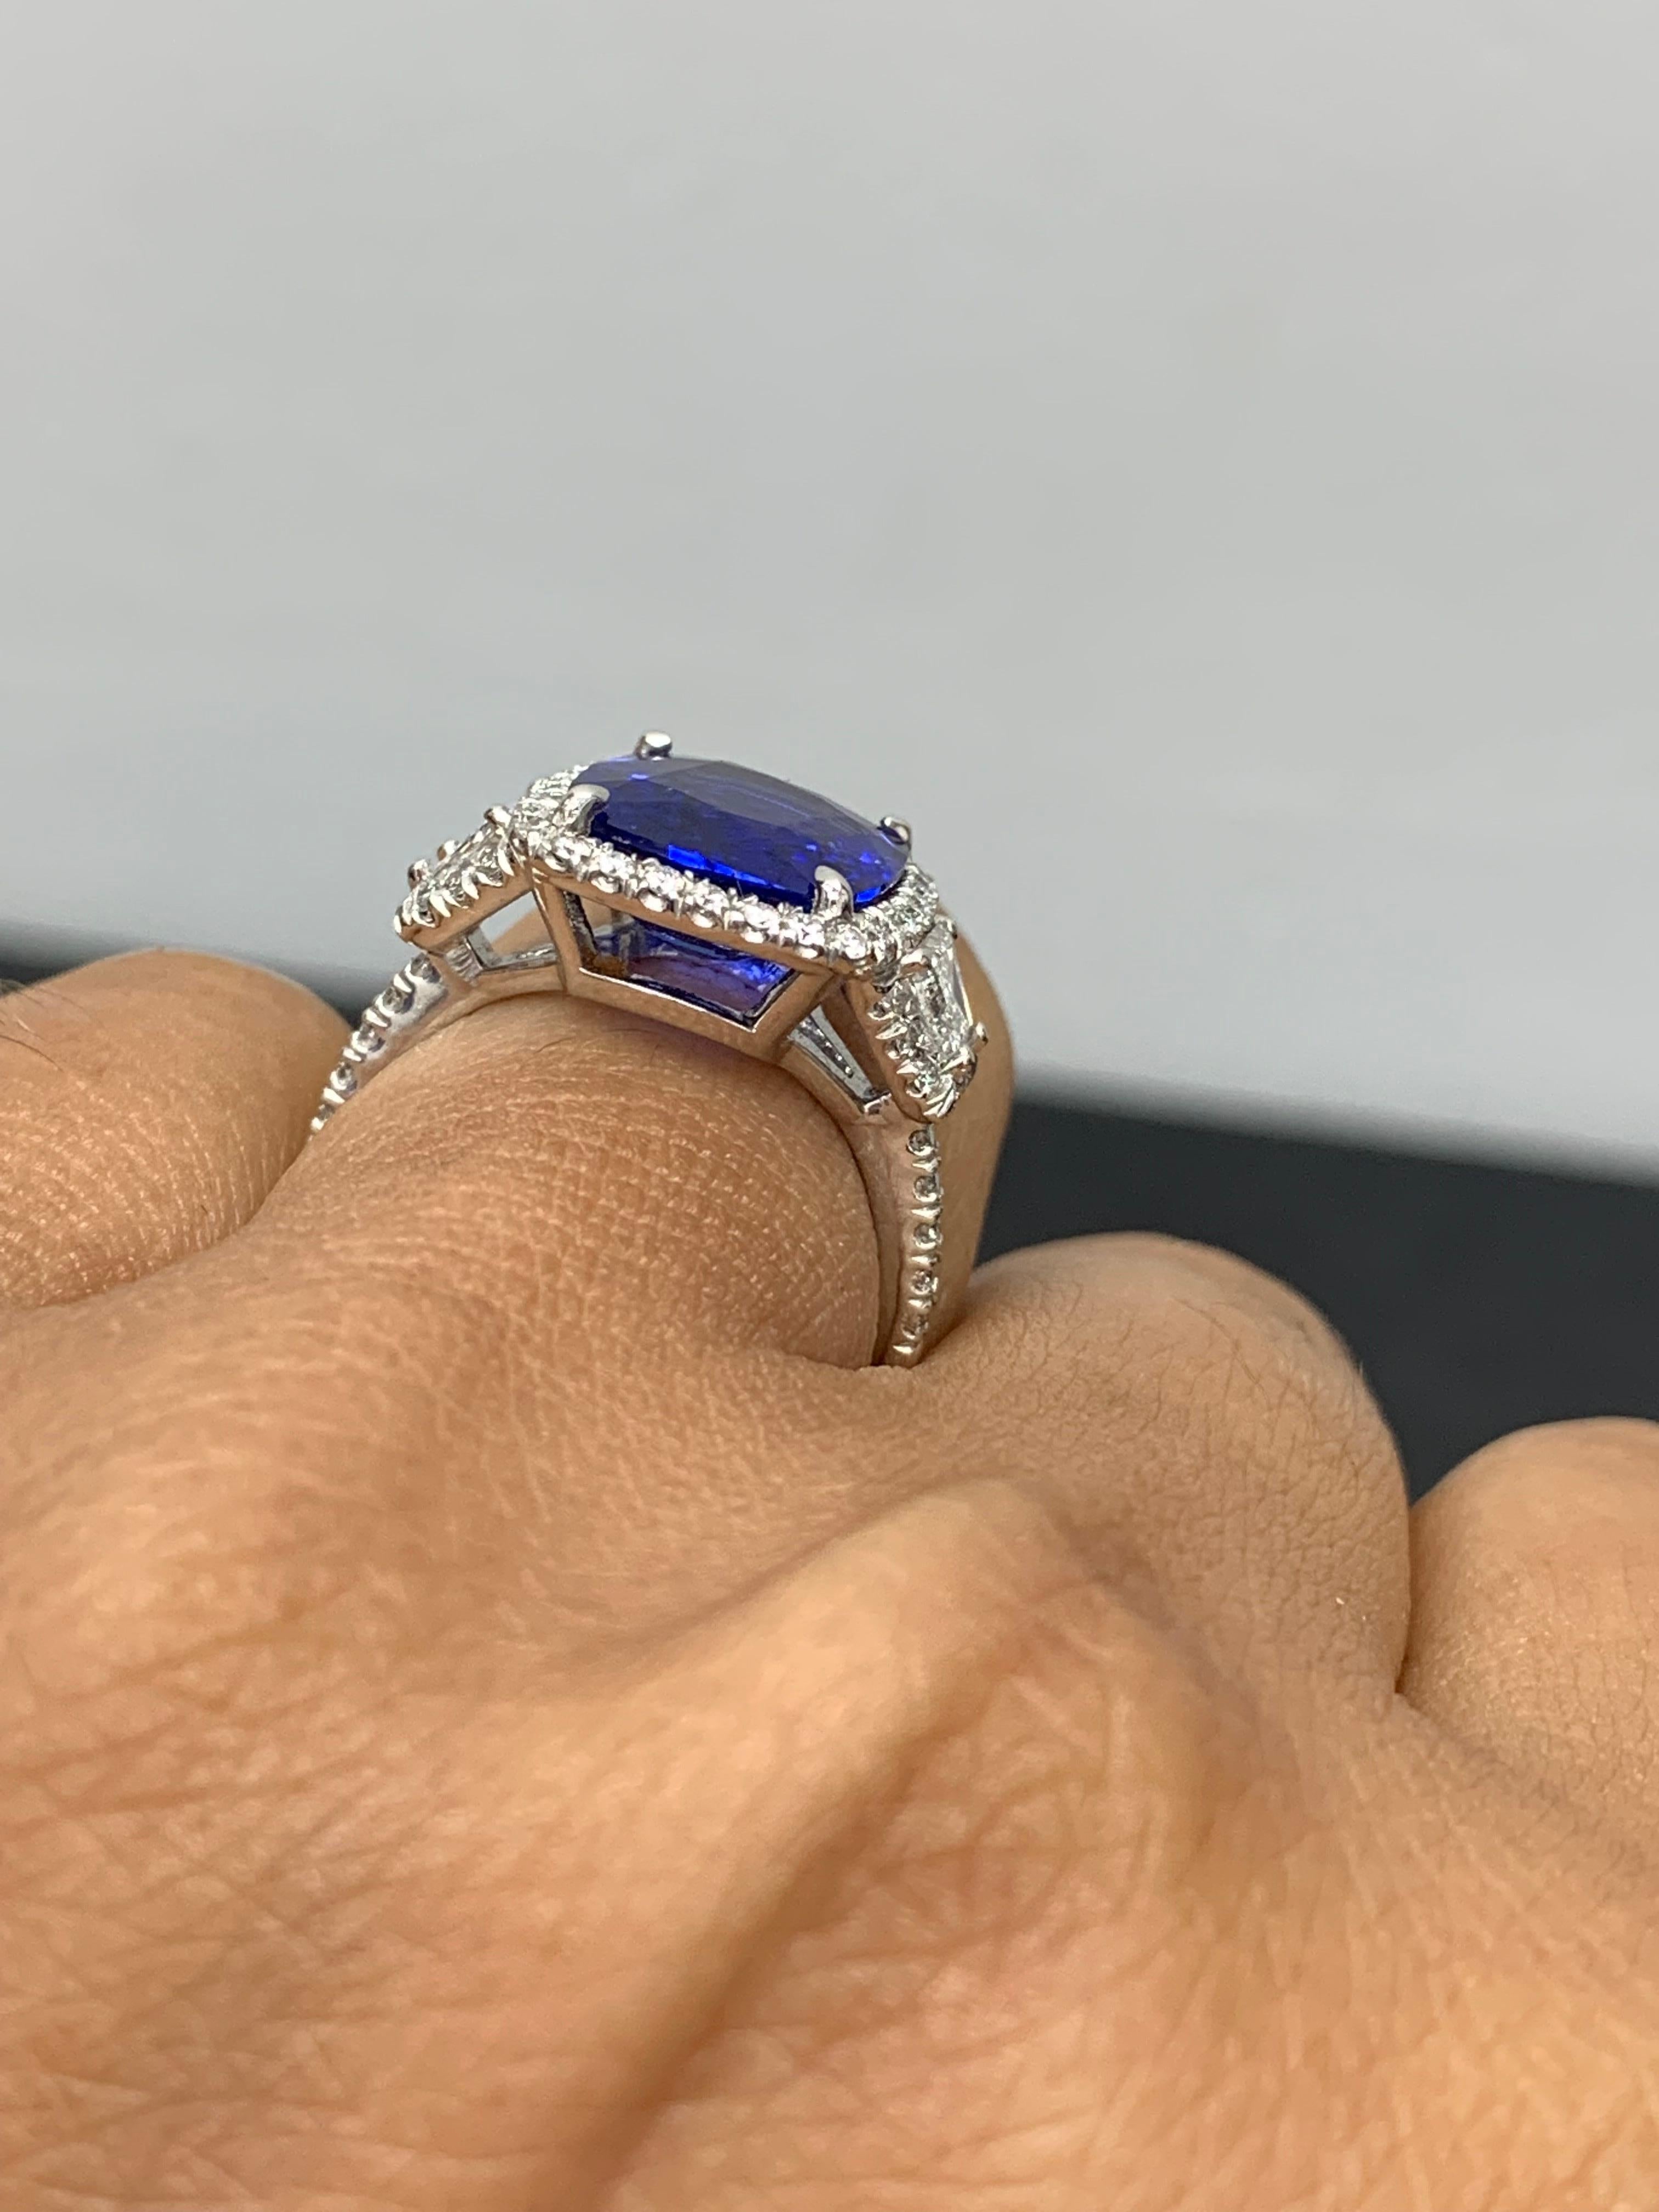 Certified 5.76 Carat Cushion Cut Sapphire Diamond 3 Stone Ring in Platinum For Sale 1